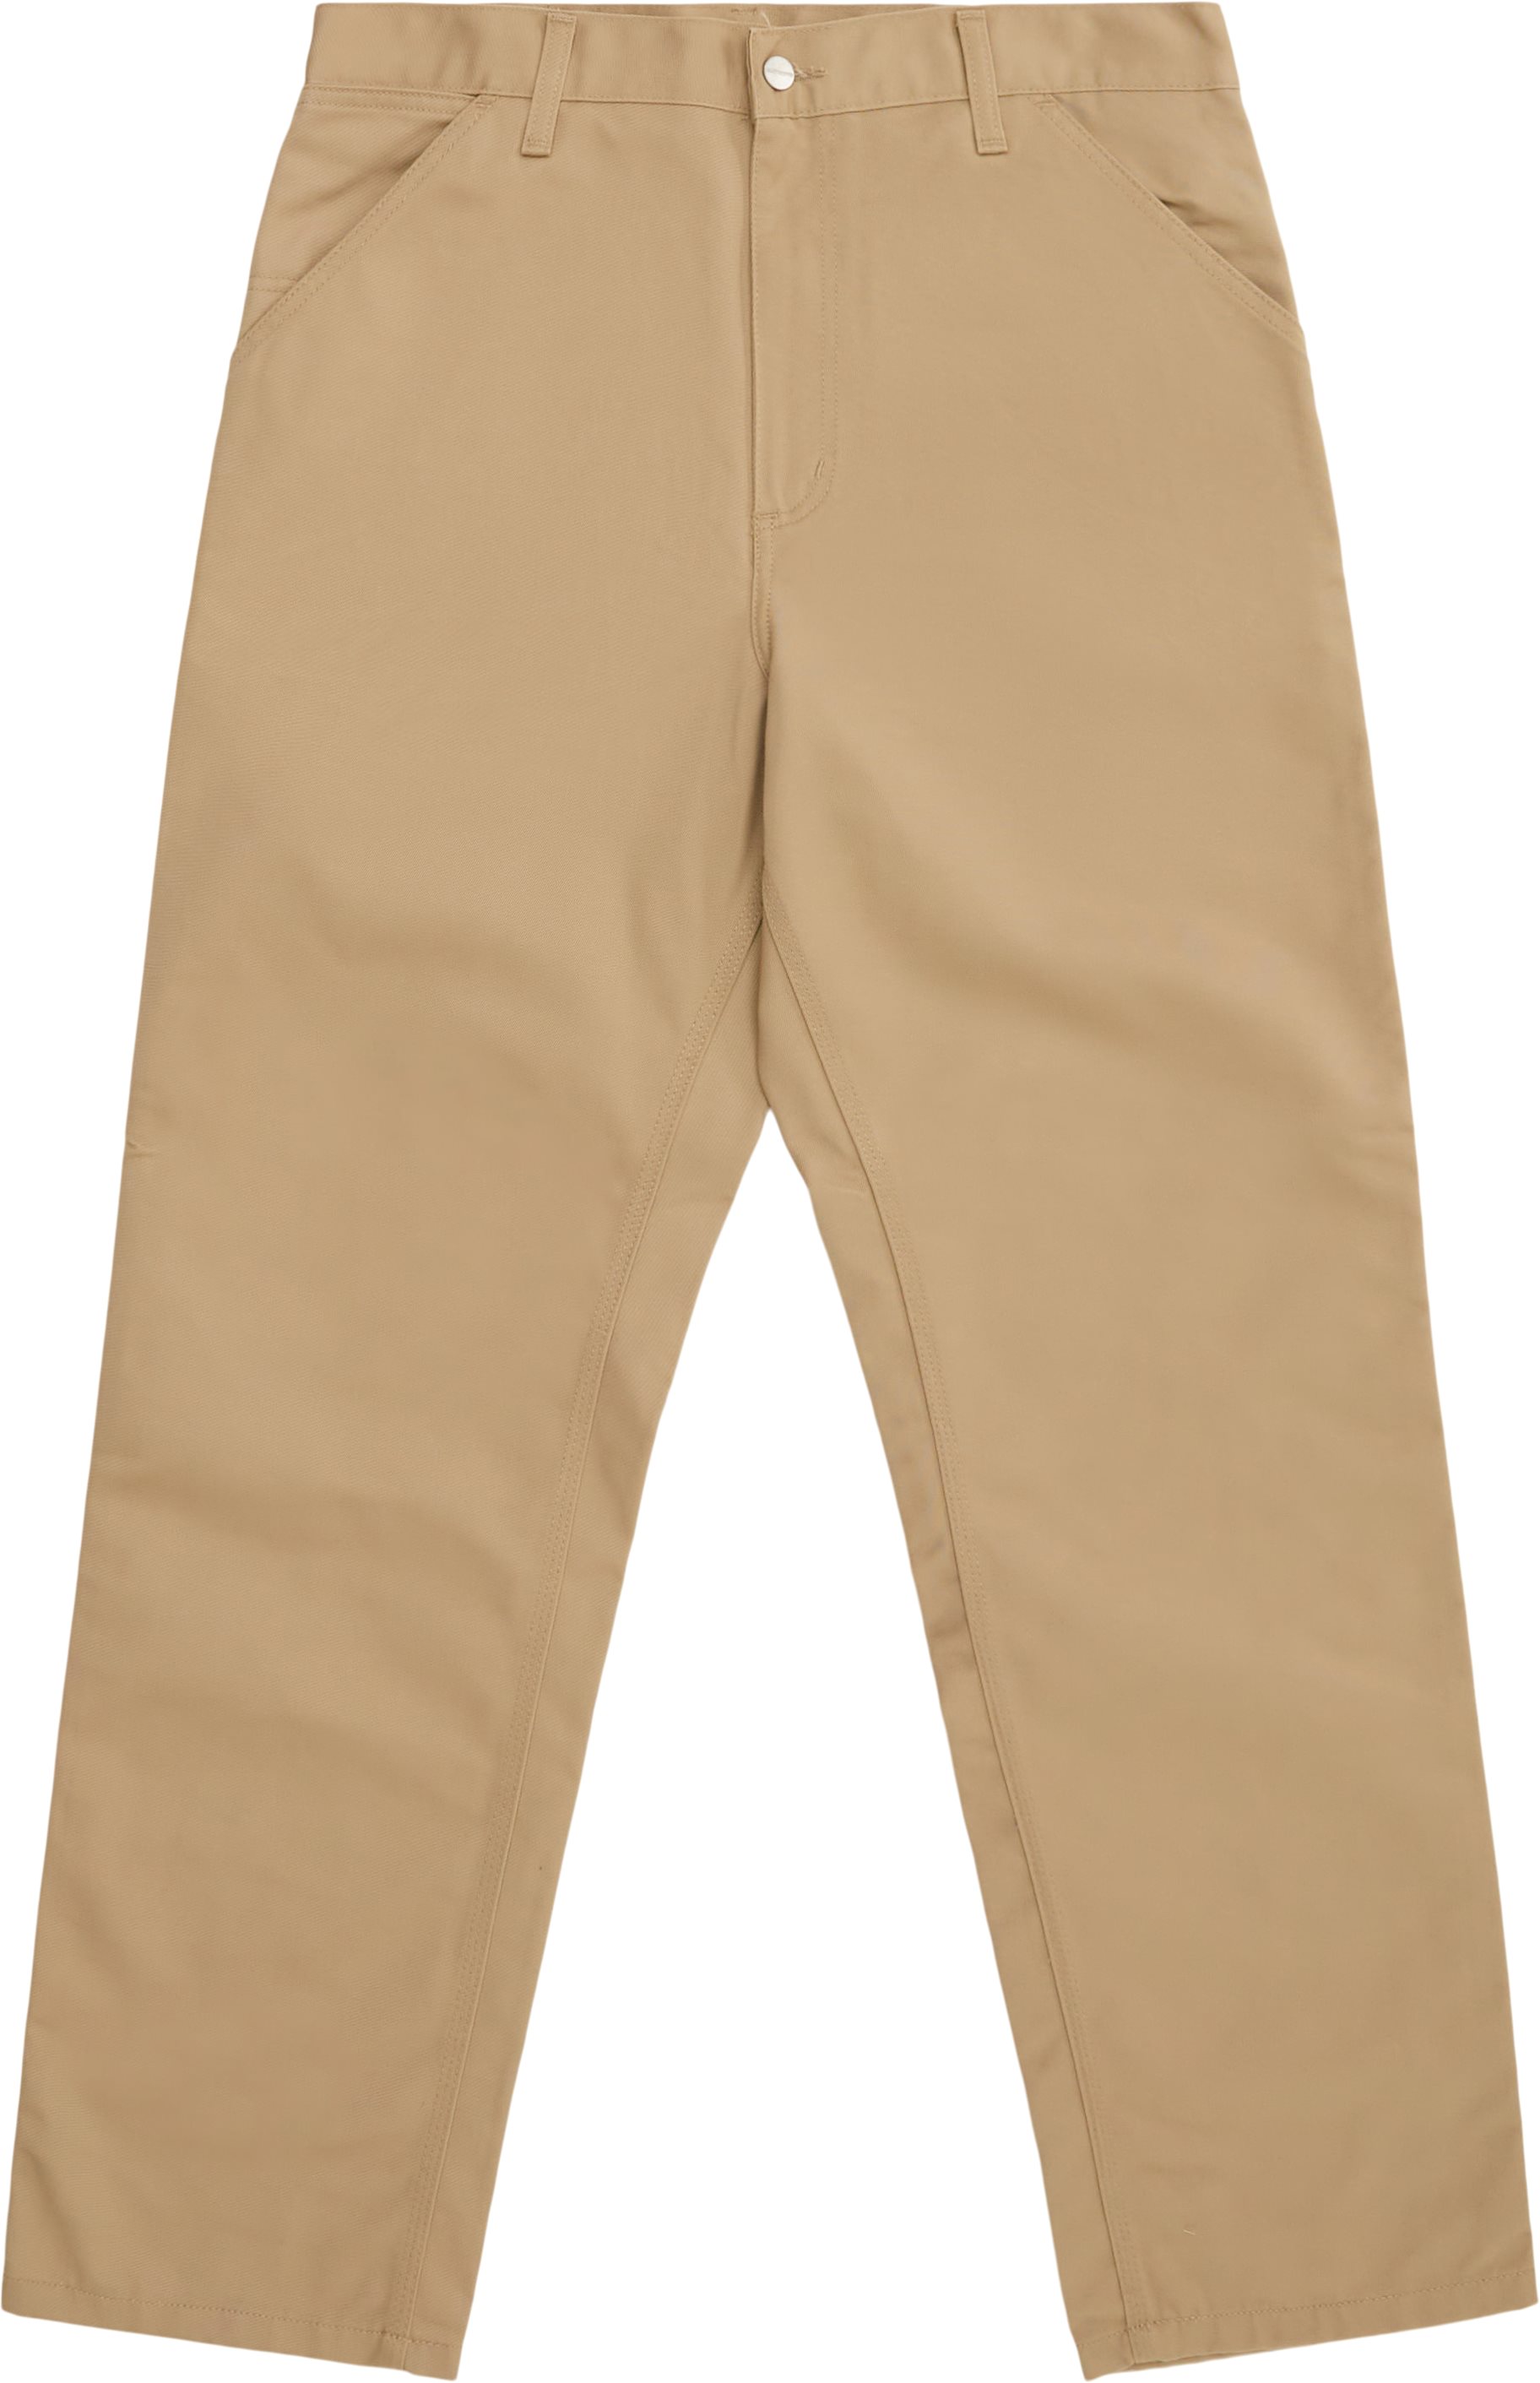 Carhartt WIP Trousers SIMPLE PANT I020075 Sand